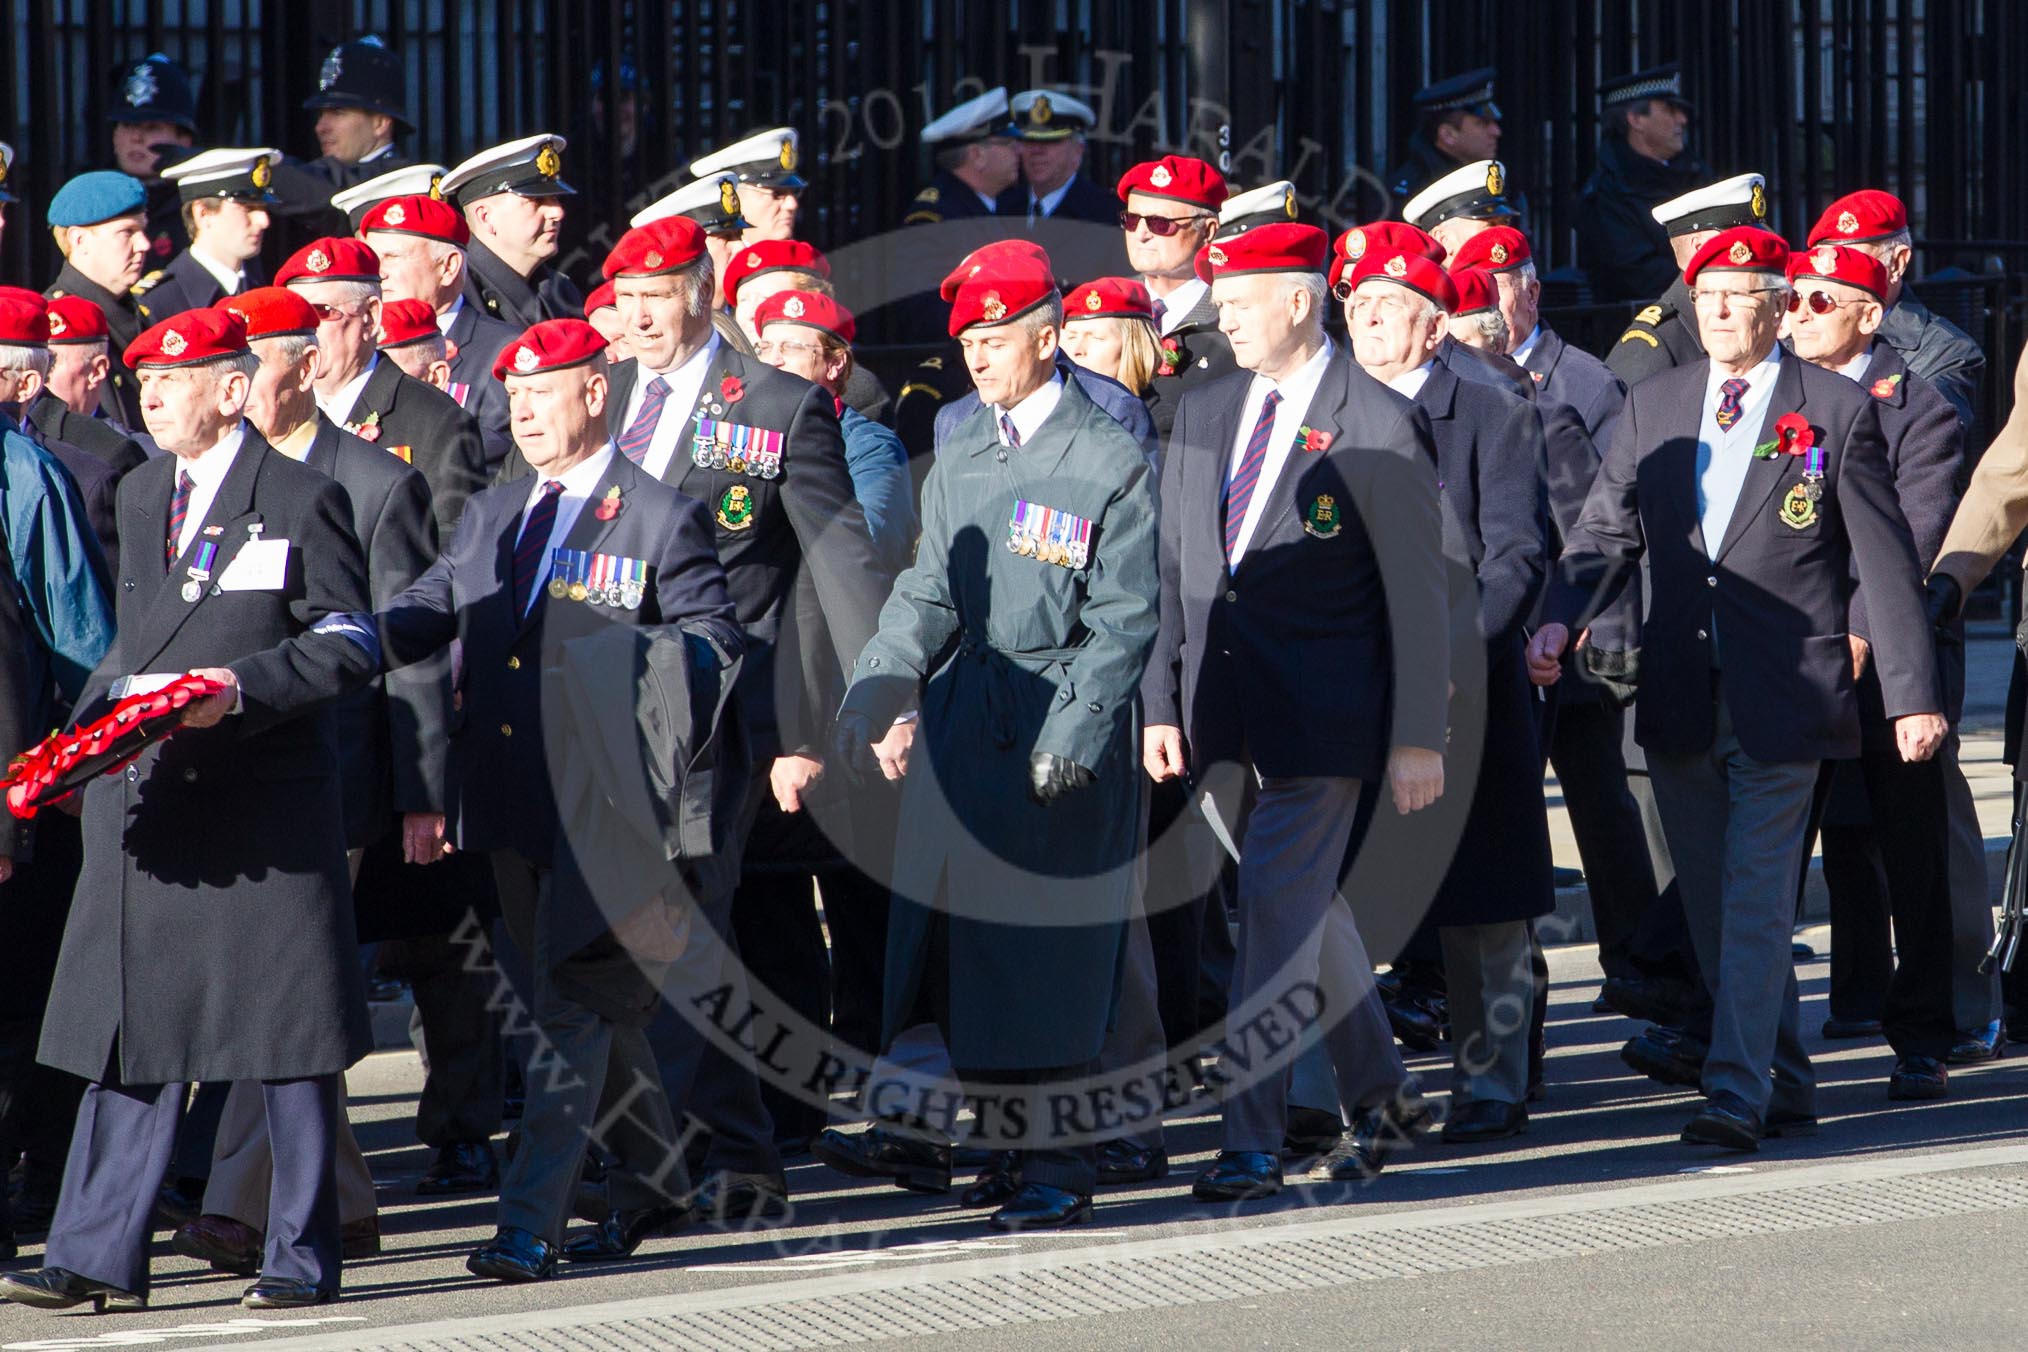 Remembrance Sunday 2012 Cenotaph March Past: Group B3, Royal Military Police Association..
Whitehall, Cenotaph,
London SW1,

United Kingdom,
on 11 November 2012 at 11:55, image #825